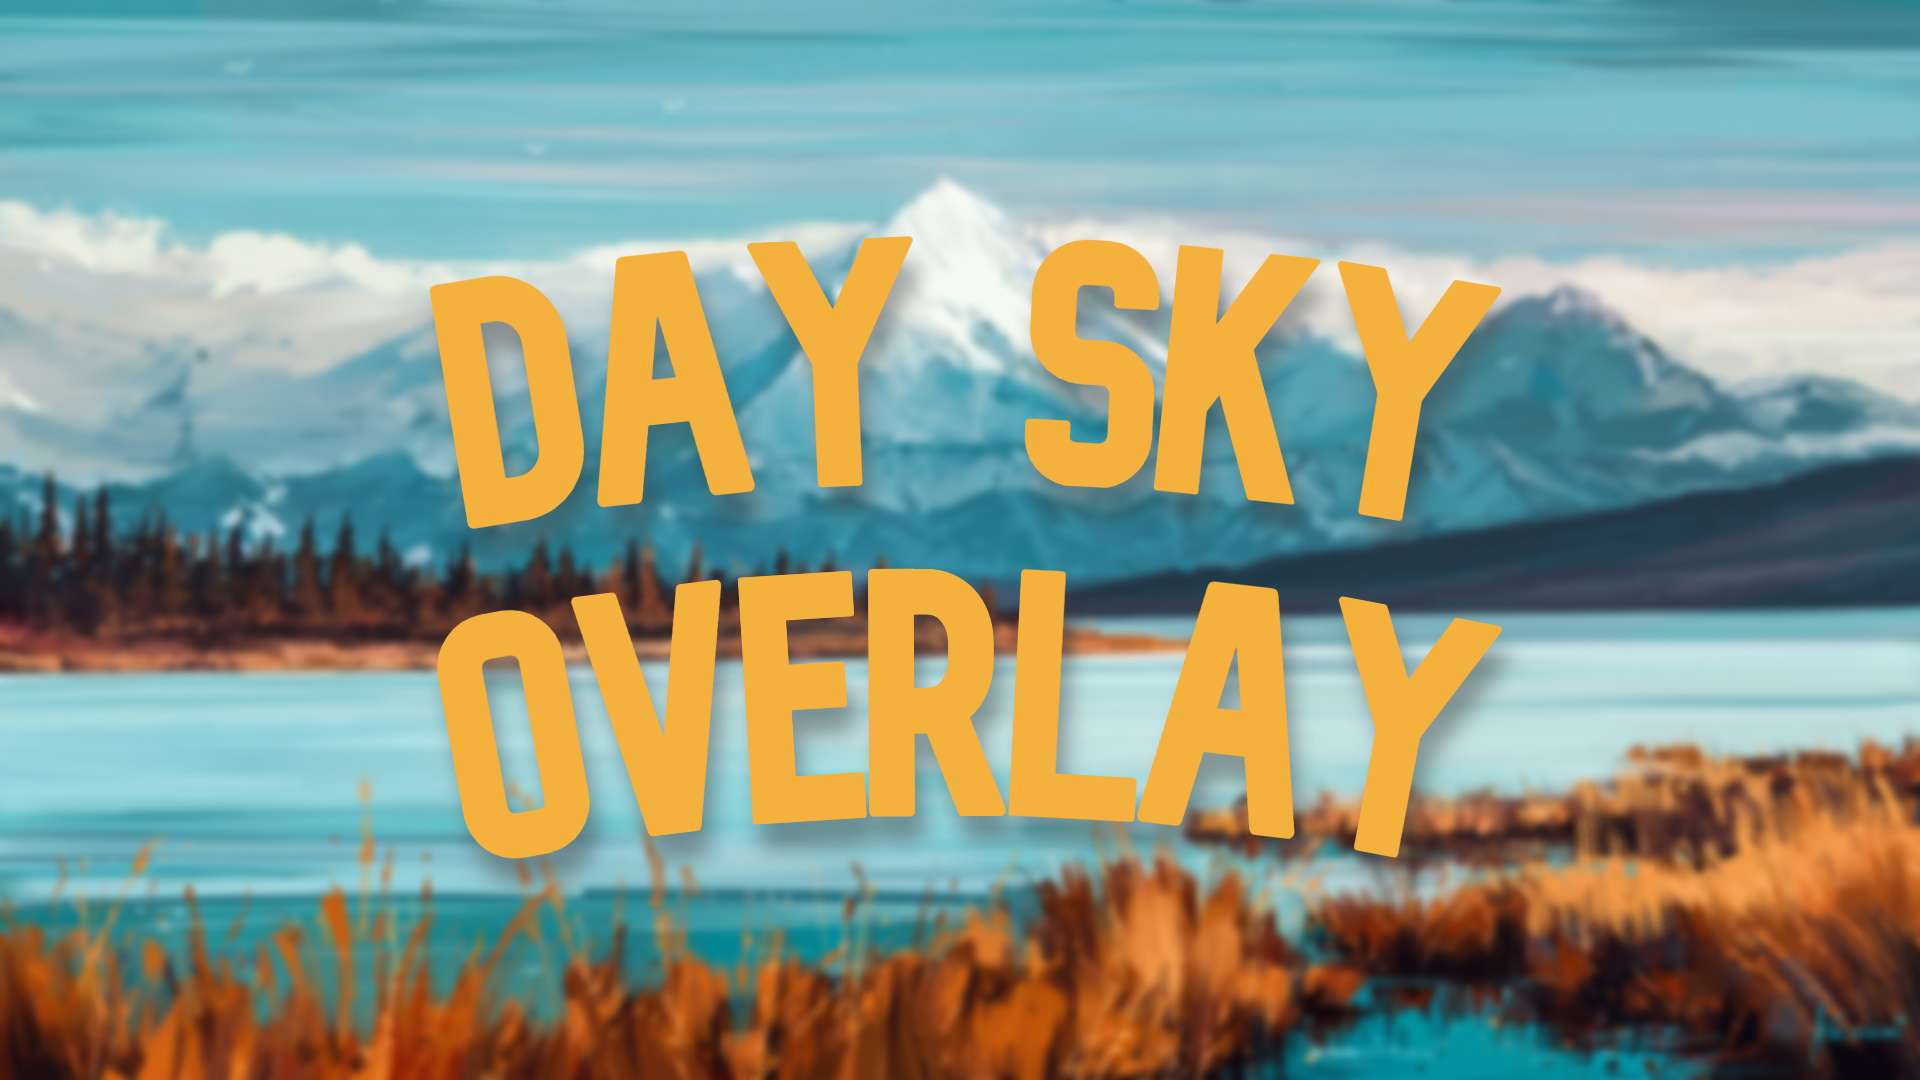 Day Sky Overlay #2 16x by rh56 on PvPRP